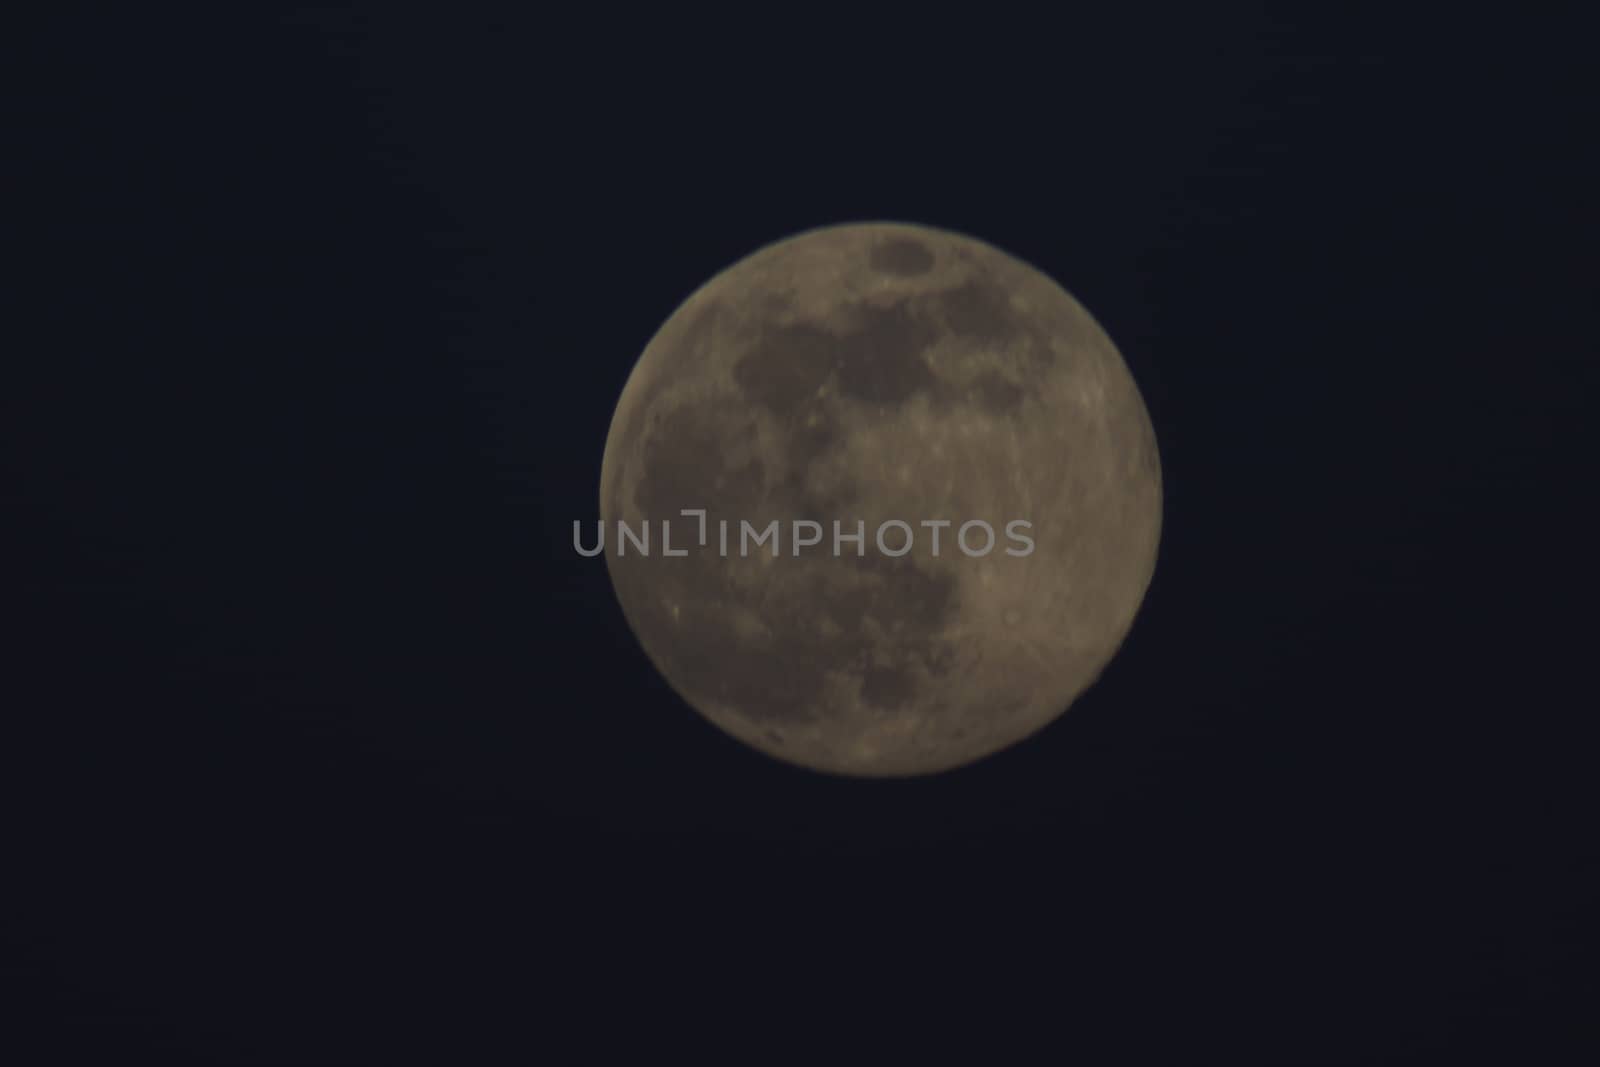 Super moon close-up pictures from April at Vienna by hanibalsmith18